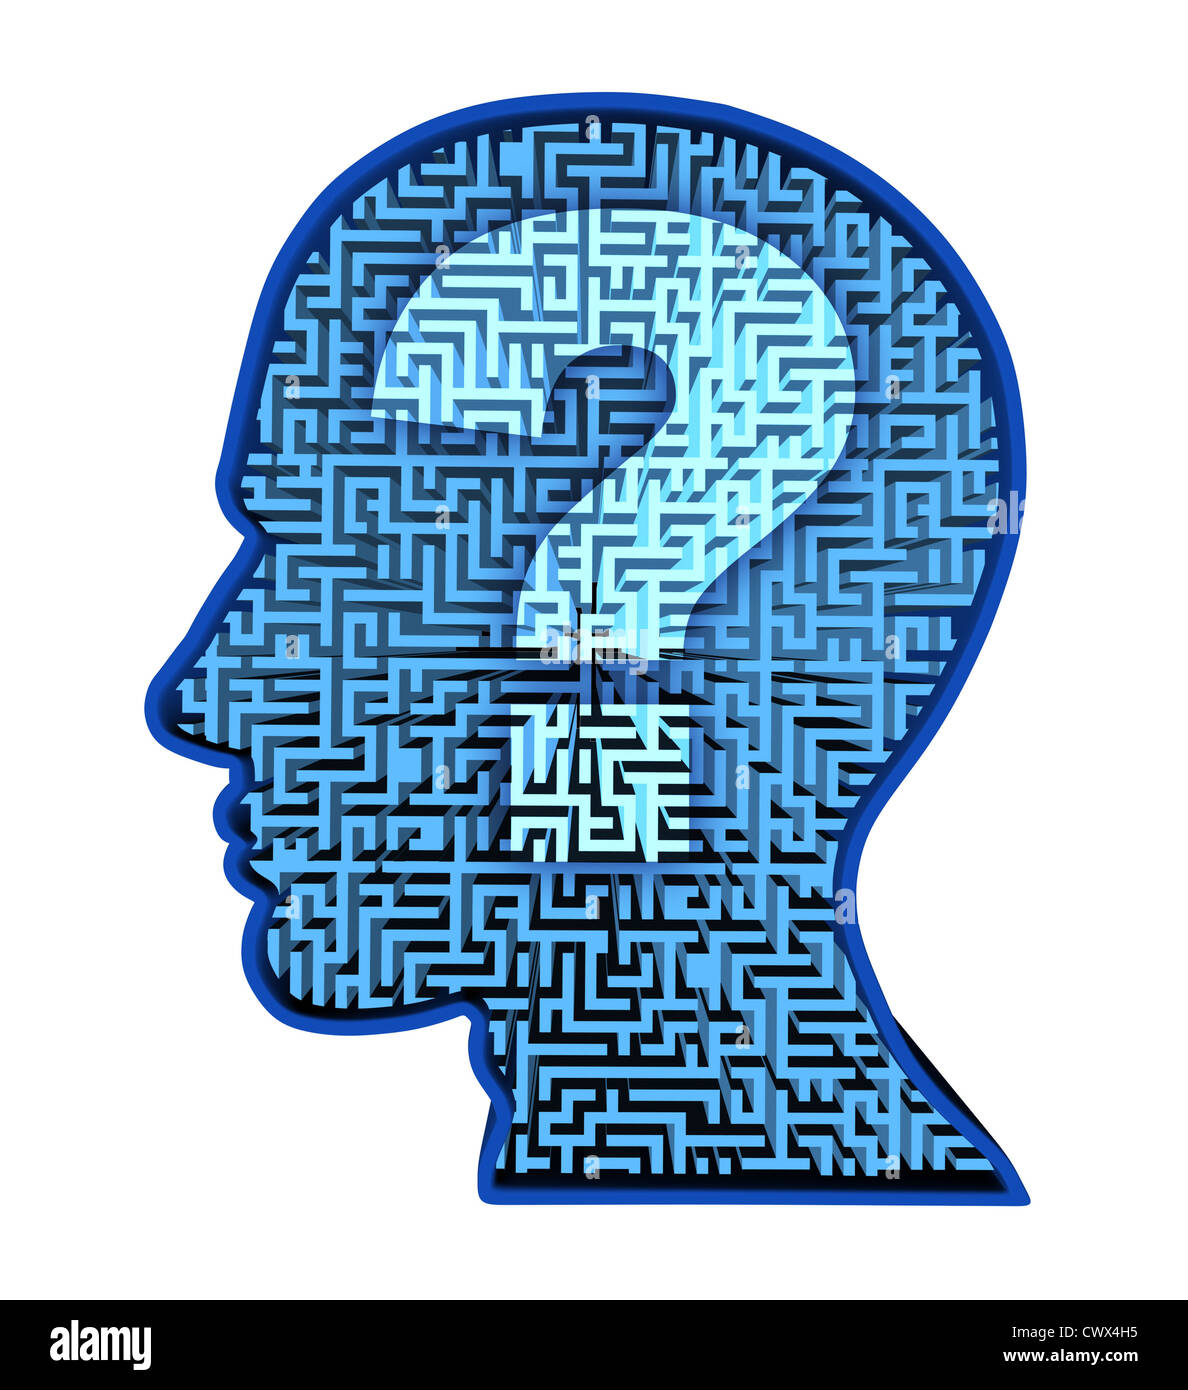 Human brain research and intelligence puzzle with a blue glowing maze and labyrinth in the shape of a human head and question mark as a symbol of the complexity of thinking as a challenging problem to solve by medical doctors. Stock Photo